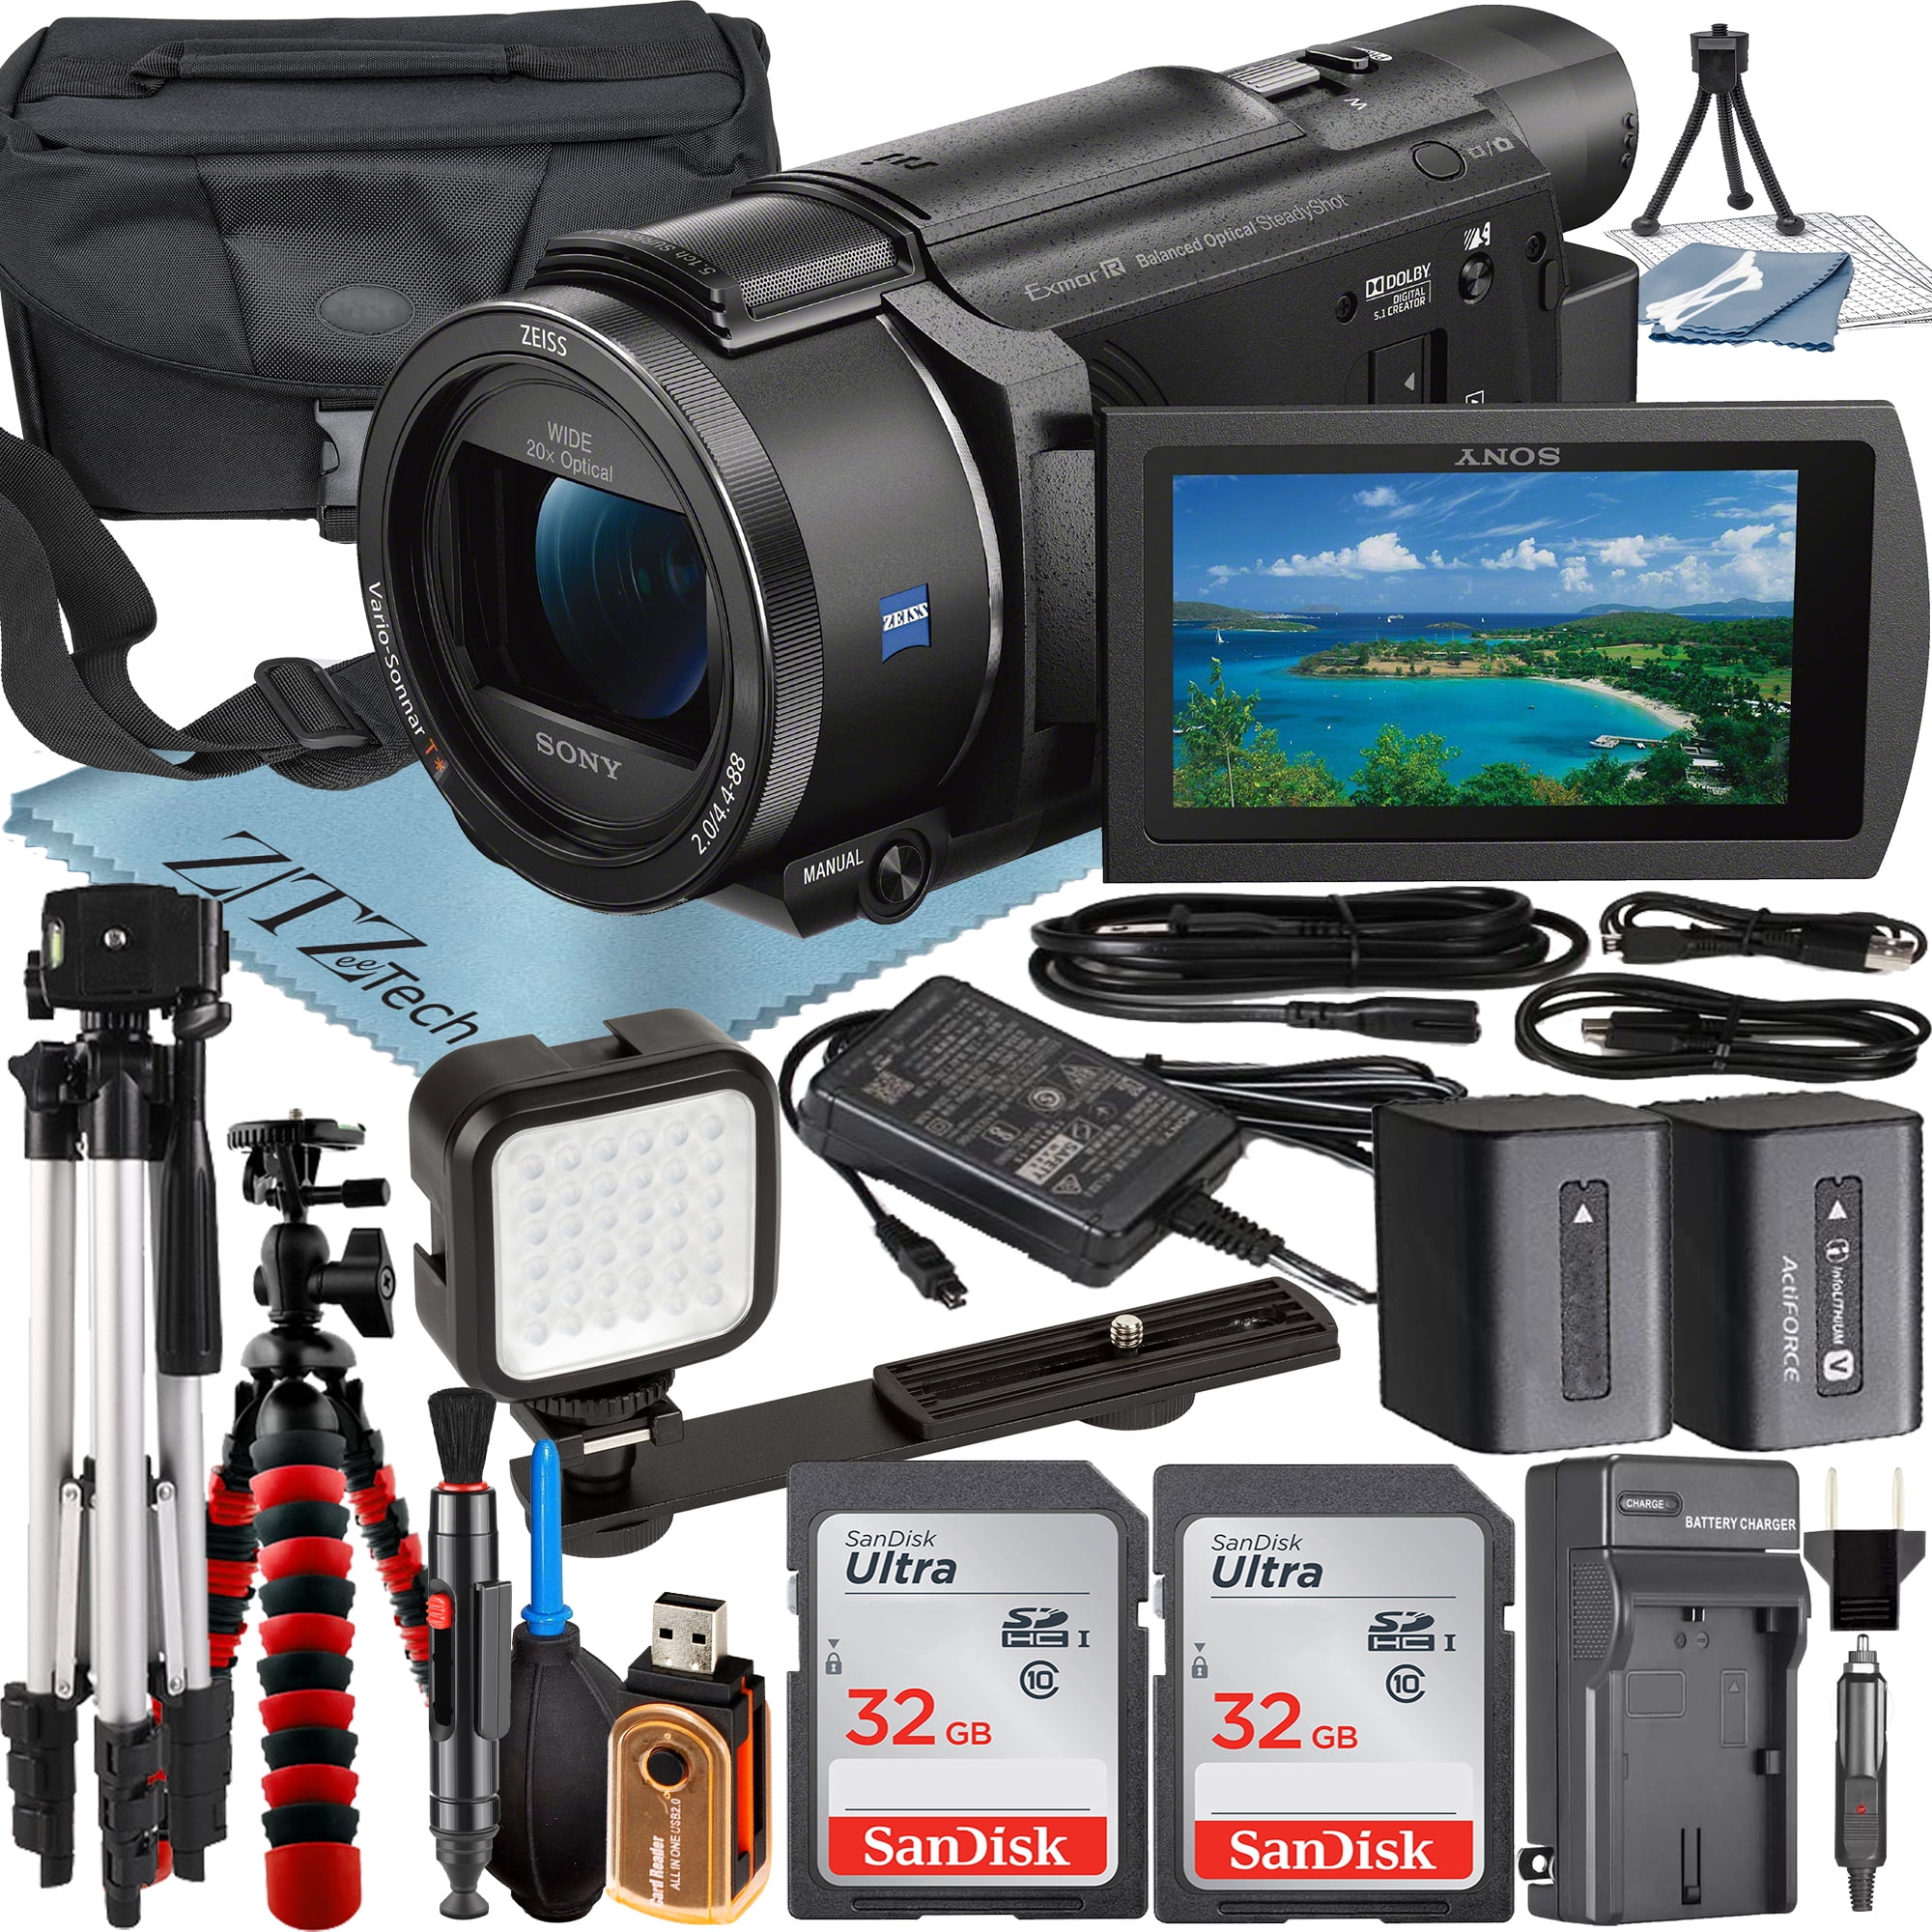 Sony FDR-AX53 4K Ultra HD Handycam Camcorder with 2 Pack 32GB SanDisk  Memory Card + LED Light Flash + Case + Tripod + ZeeTech Accessory Bundle